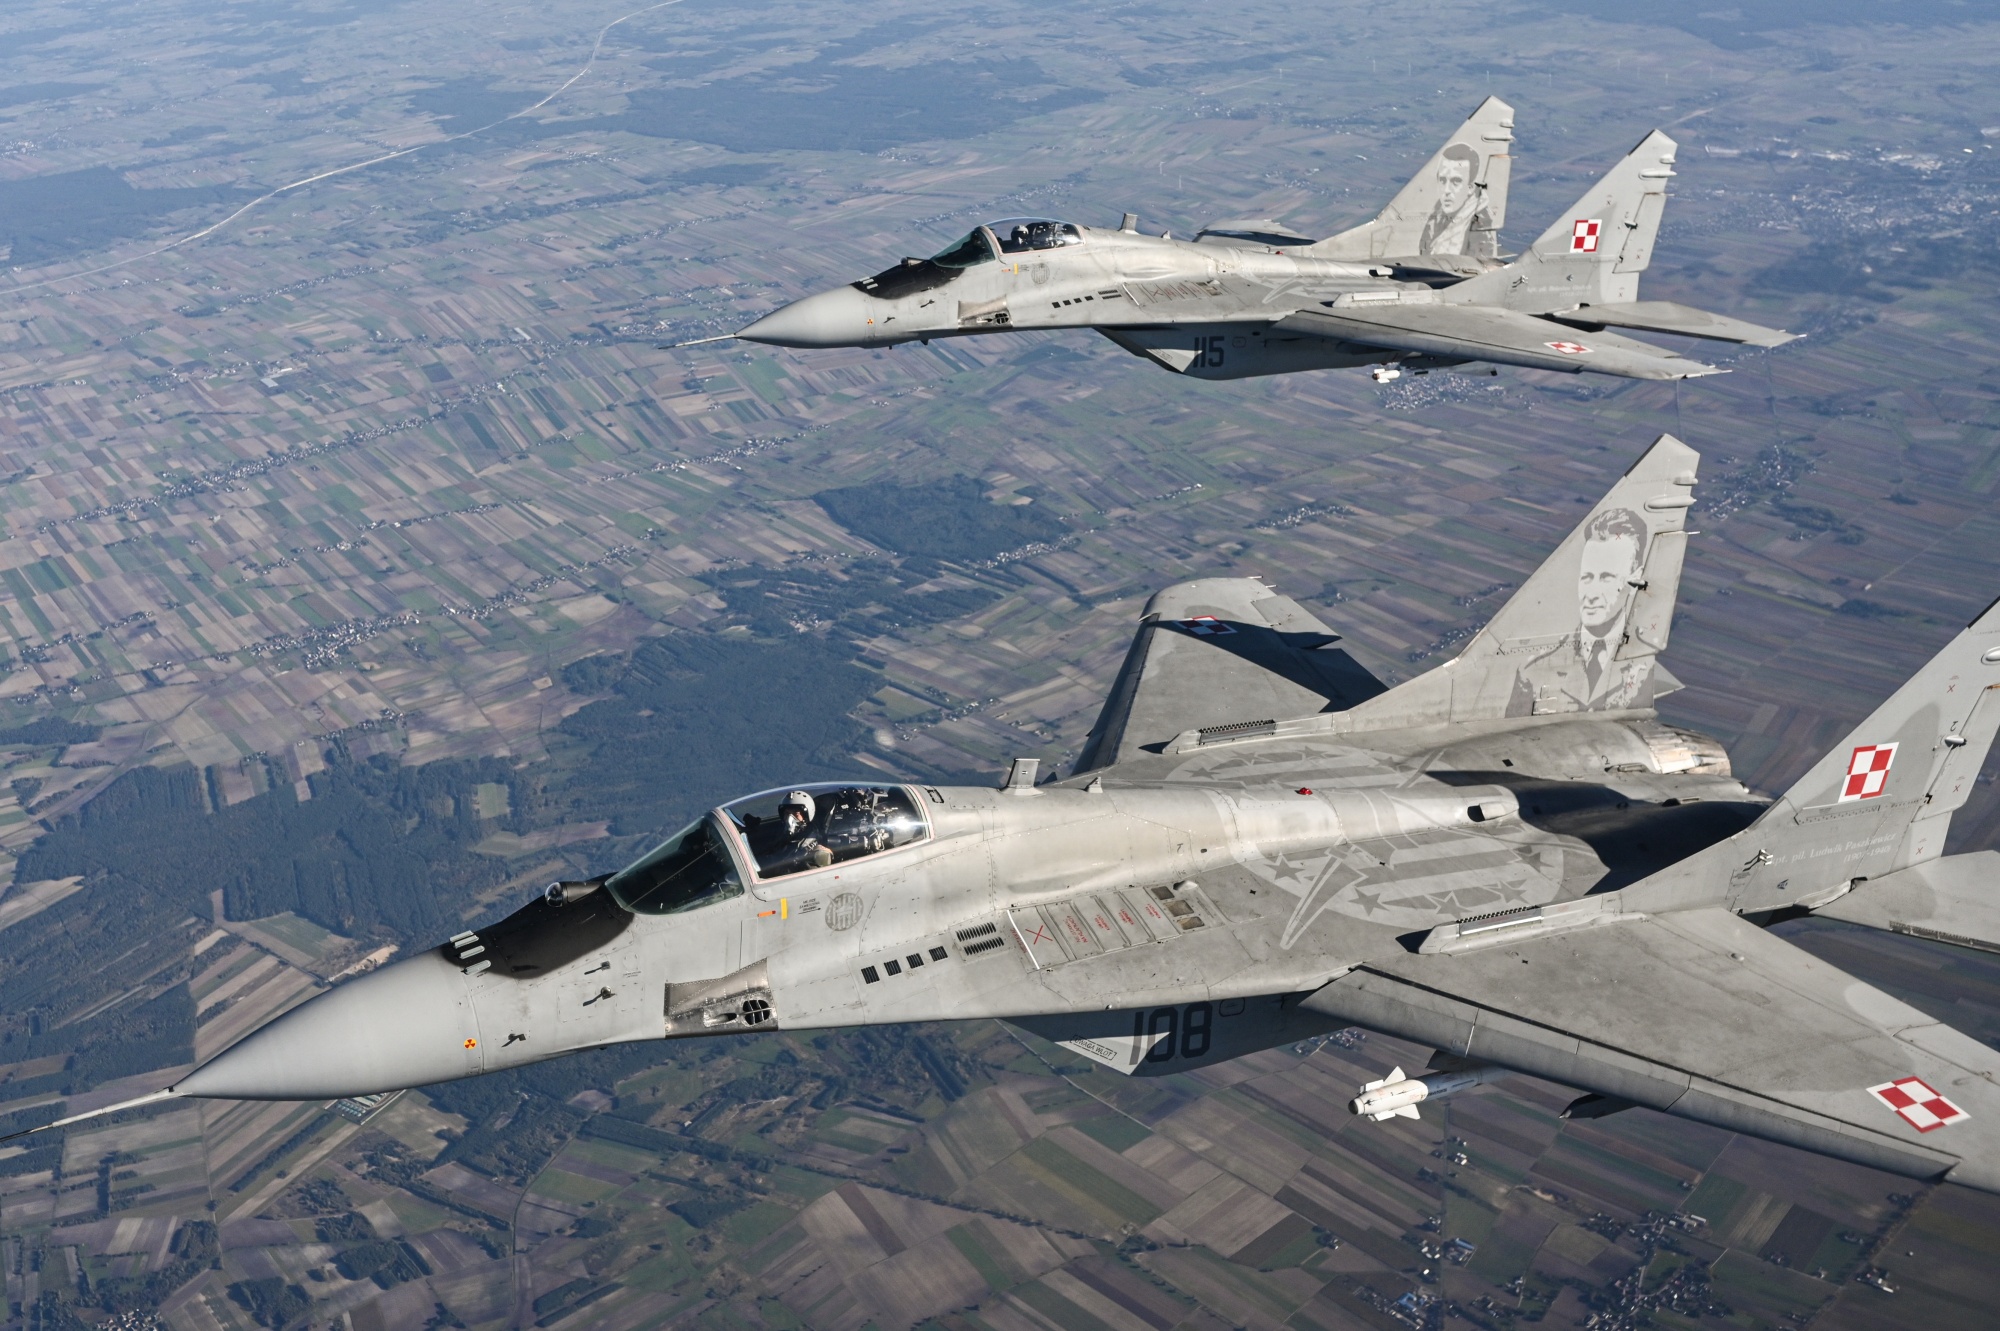 Polish Air Force MIG-29 fighter jets.